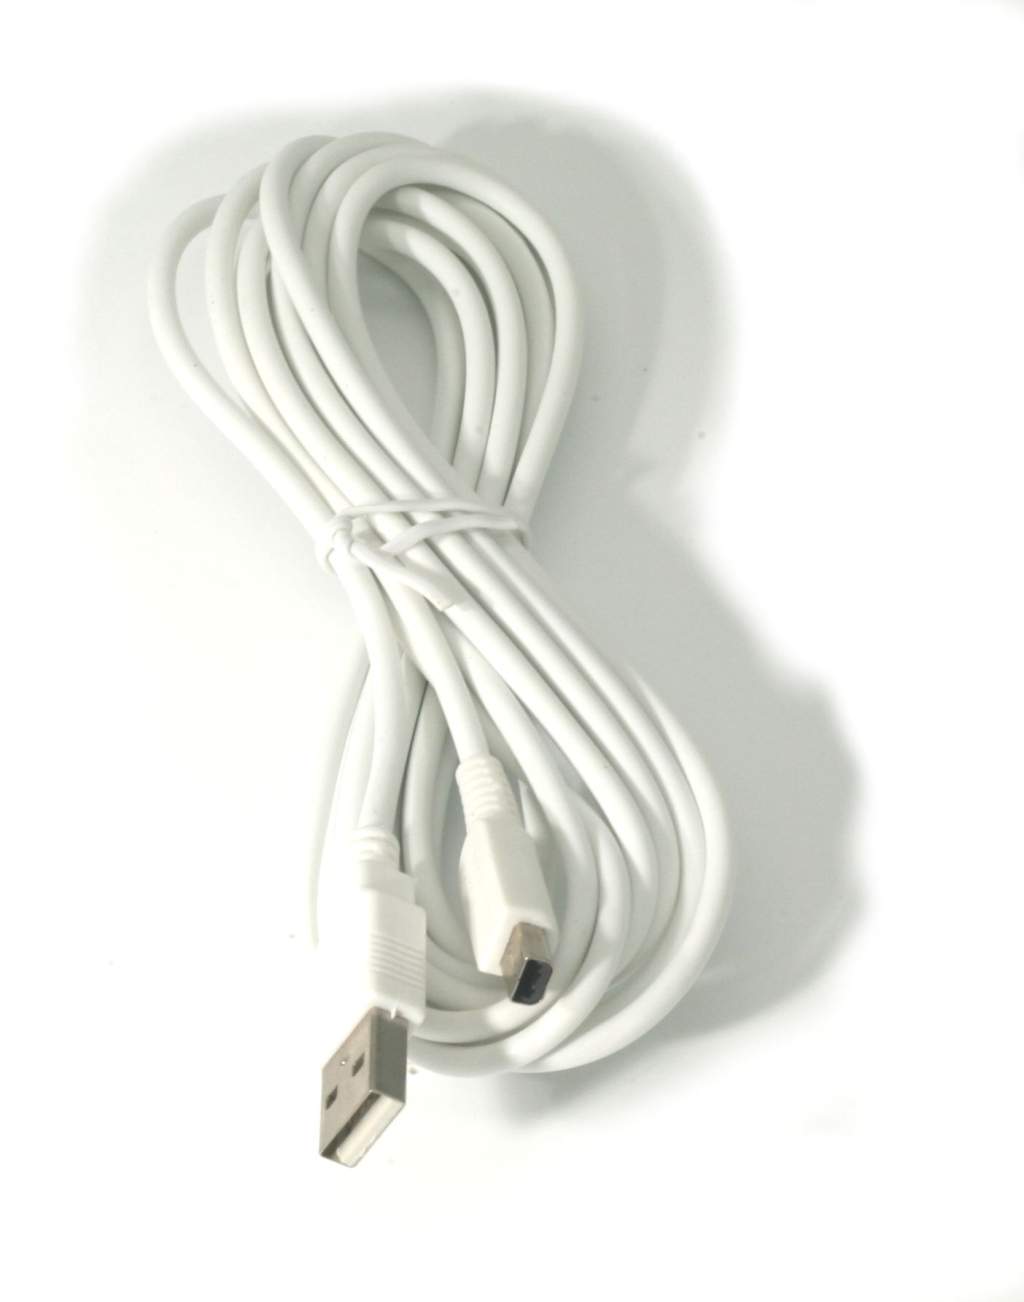 Nintendo 3DS DSi DSi XL Power Charging Cable 10FT White USB 22Awg